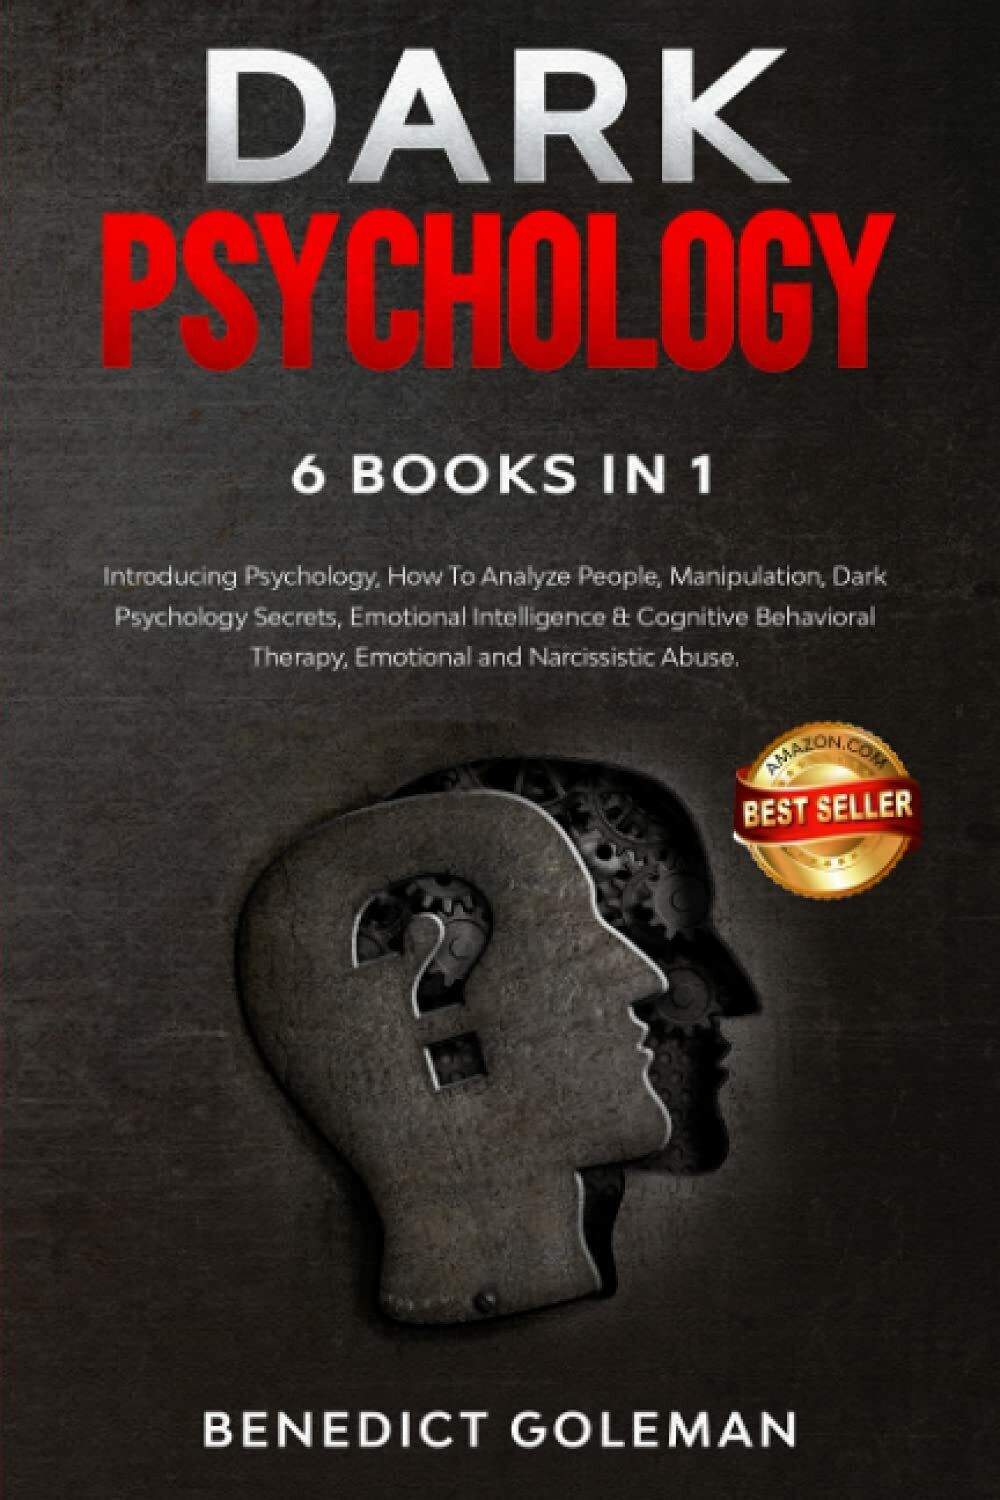 Dark Psychology 6 Books In 1 Introducing Psychology,How to Analyze People,Manipu